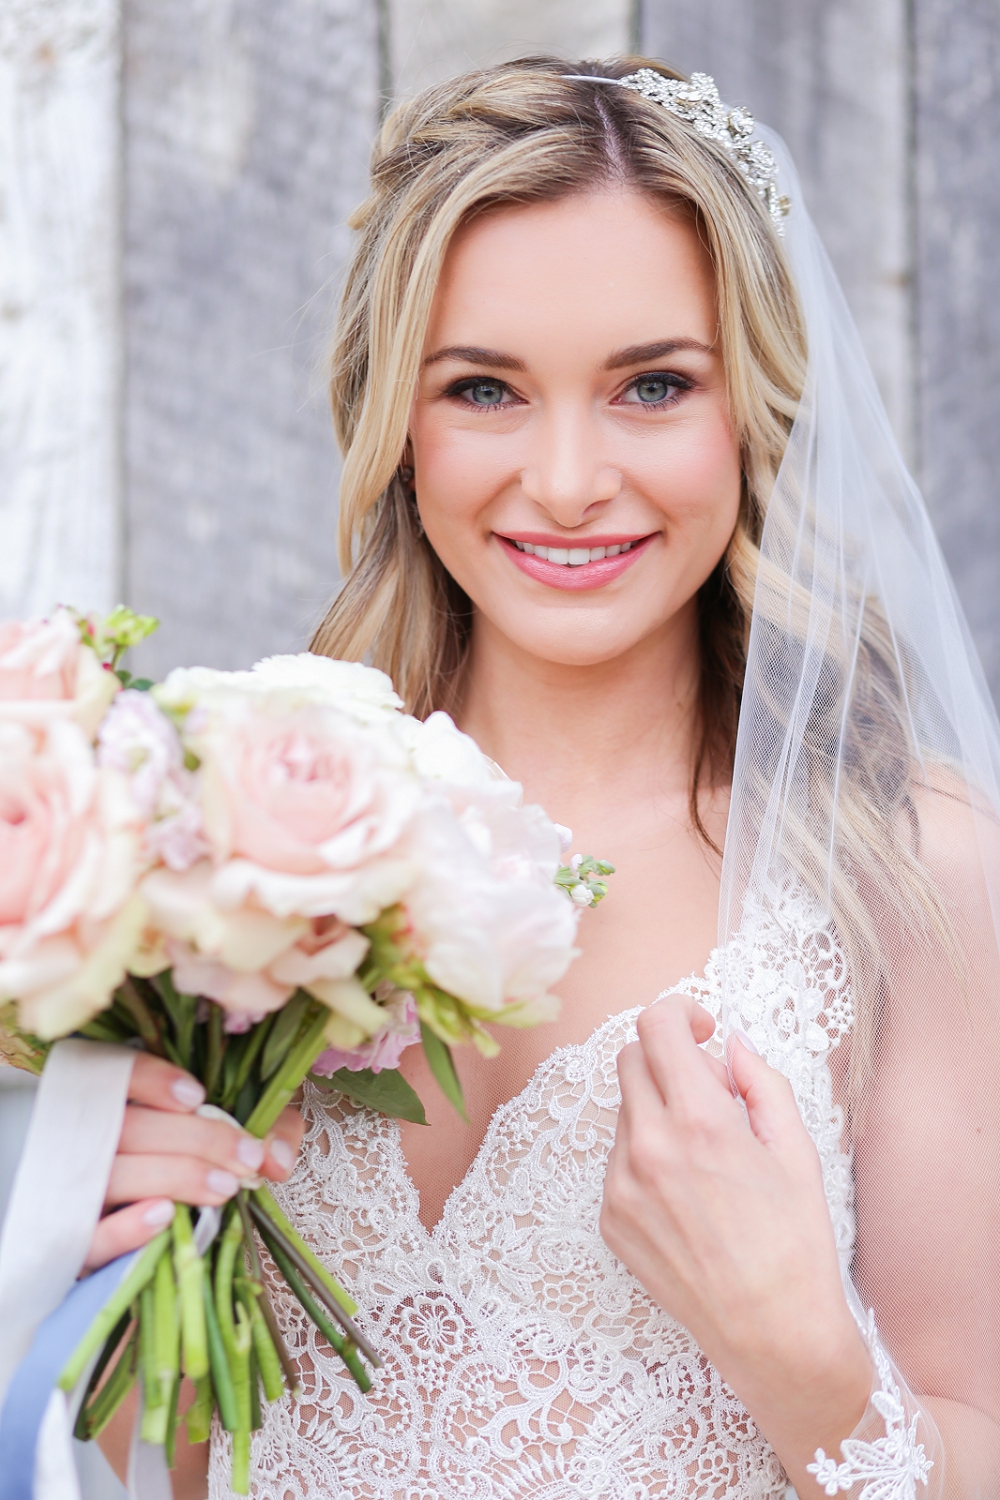 Kansas City Bridal Shops to Find Your Wedding Gown | Kansas City ...